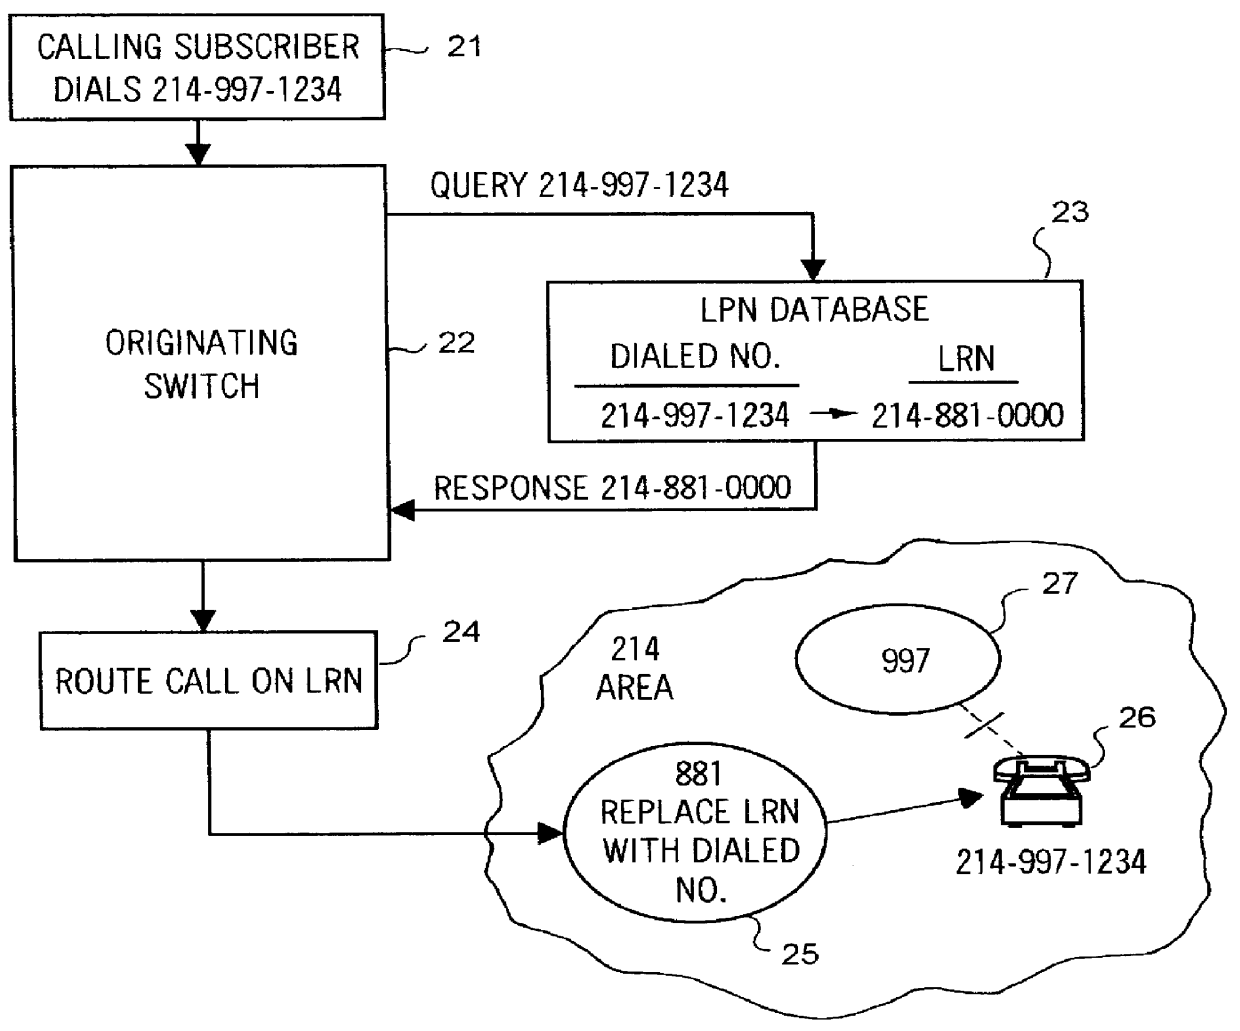 Flexible routing of local number portability (LNP) data in a telecommunications network